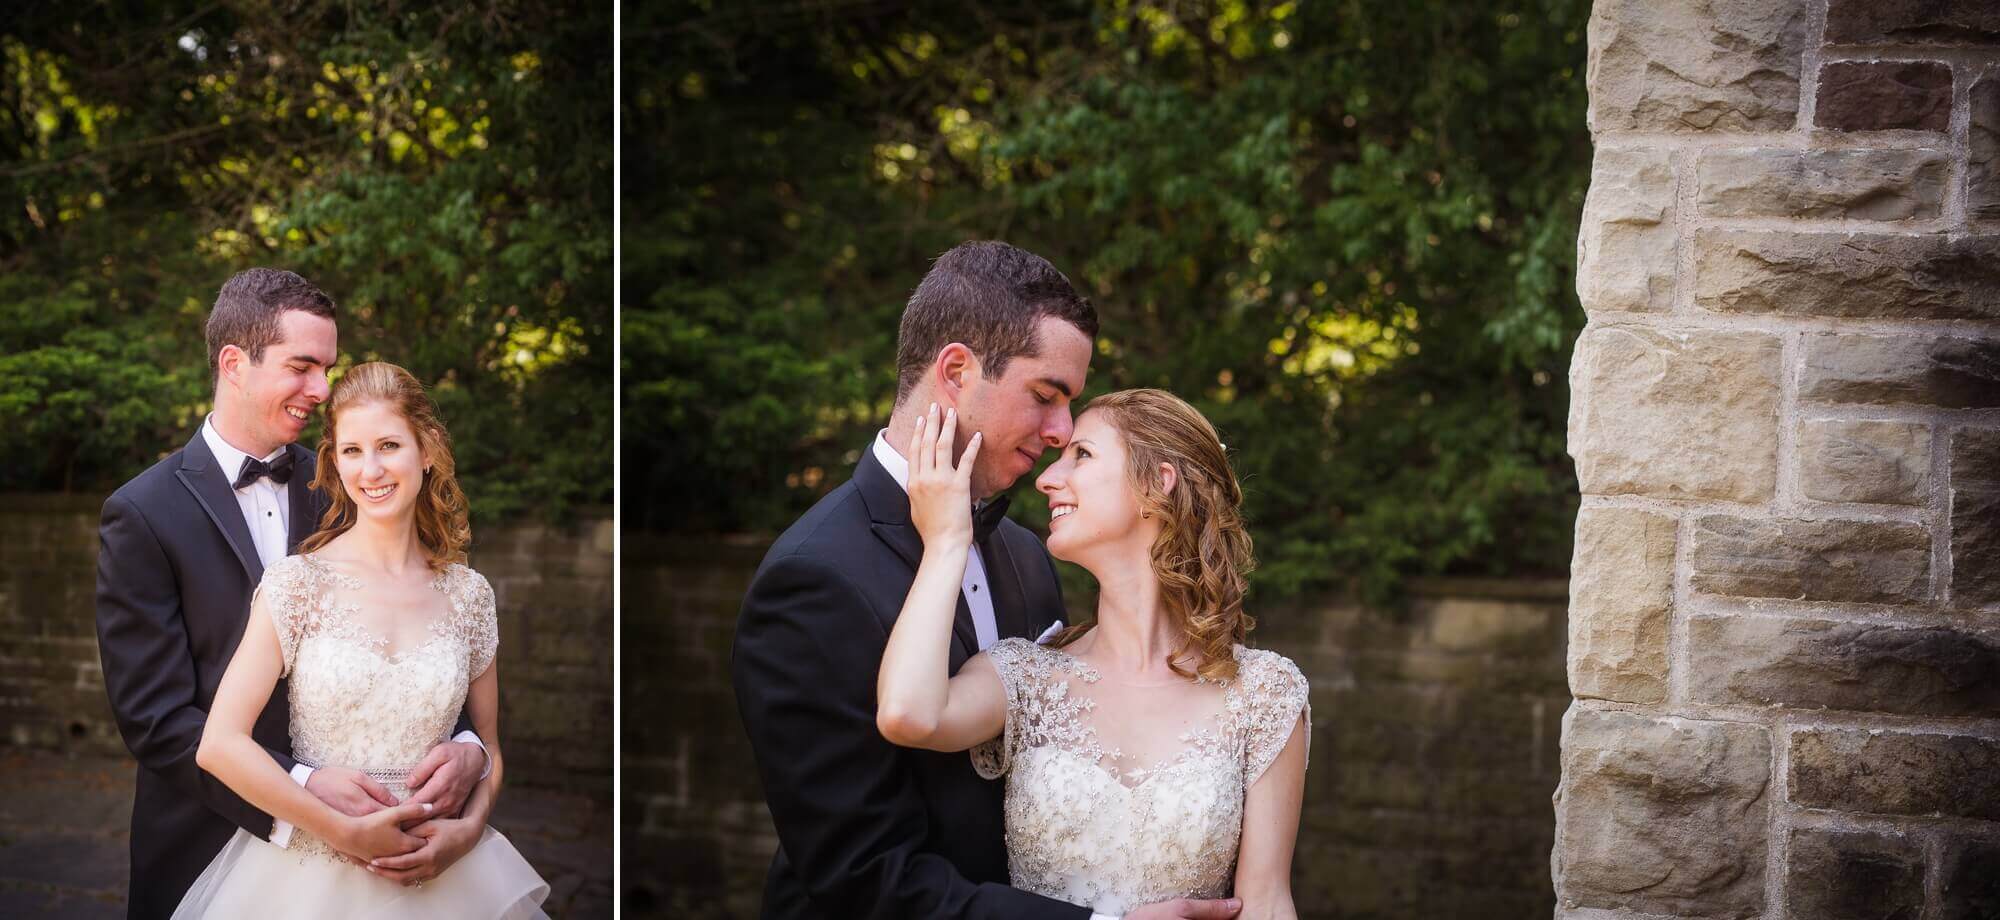 Portraits of the Bride and Groom at Alexander Muir Gardens in Toronto